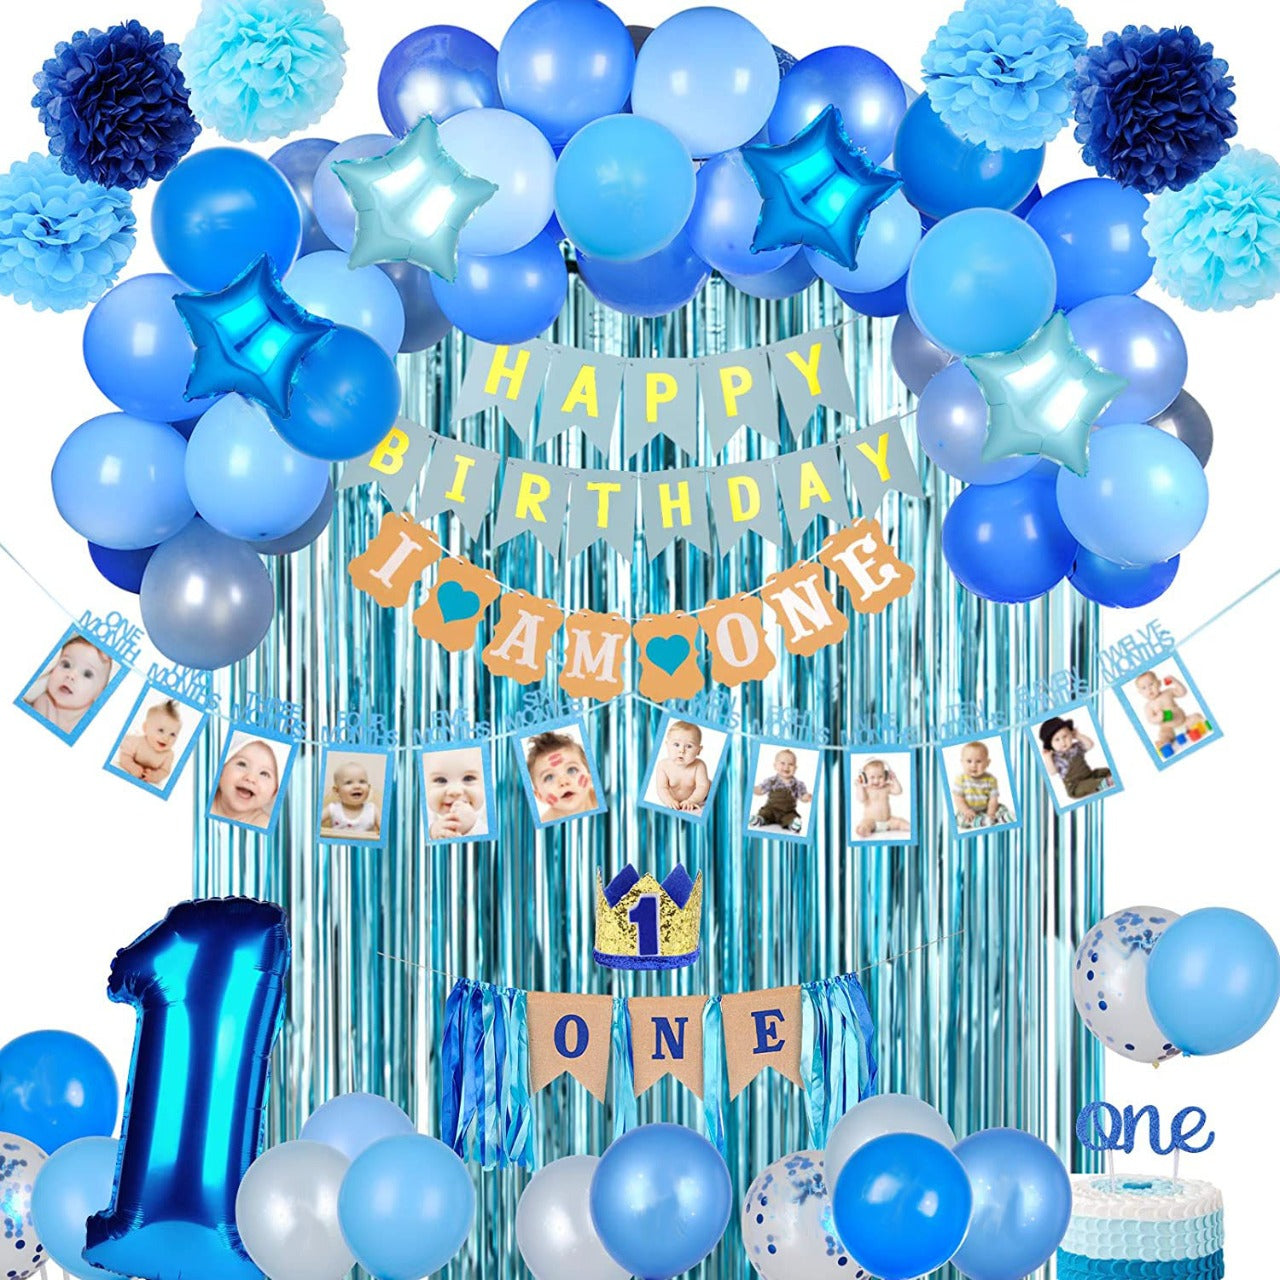 Buy First Birthday Party Decoration For Boys |Party Supplies ...